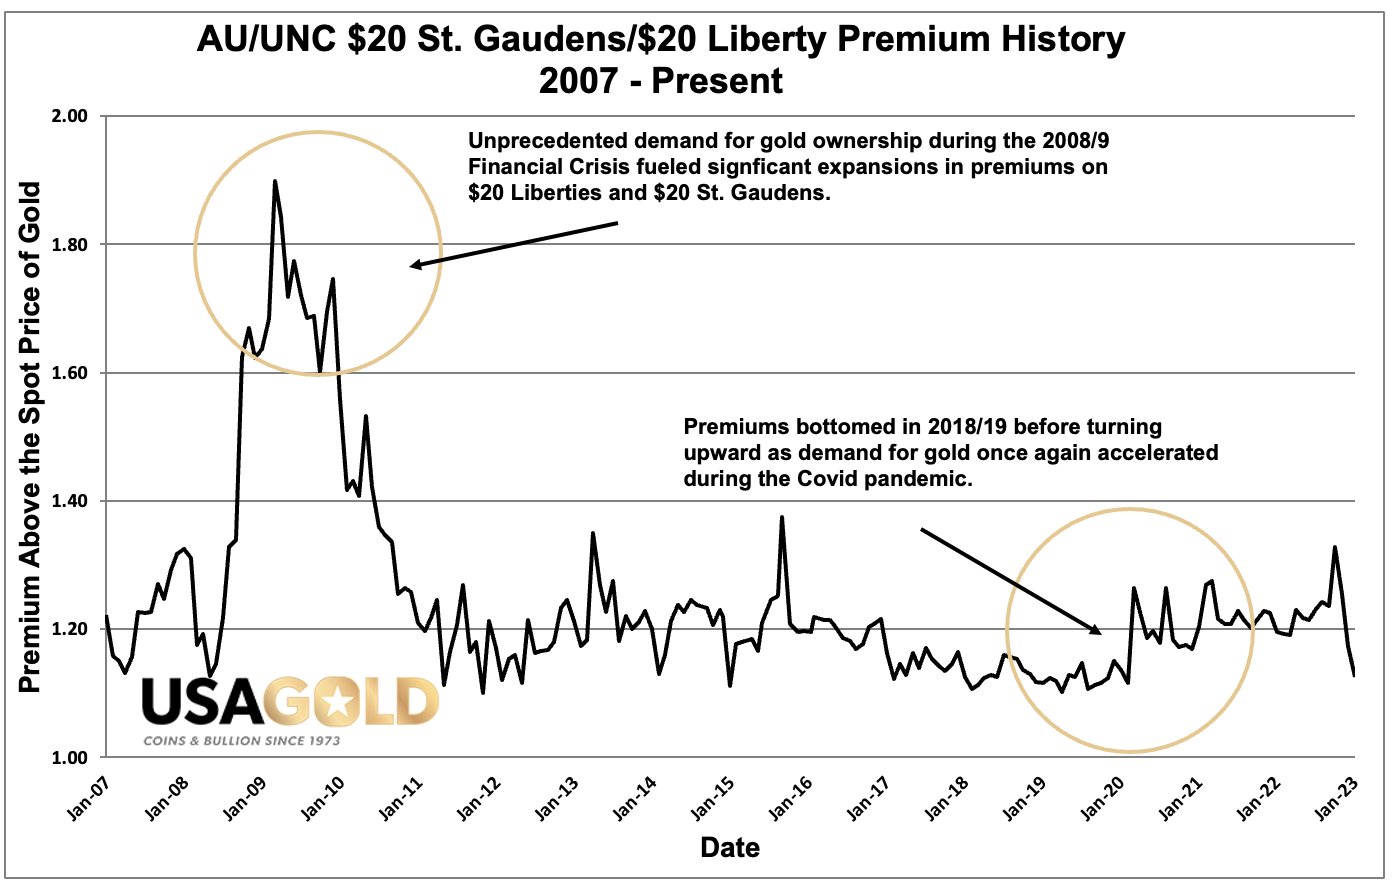 Graph of the premium performance of the $20 Liberty and $20 St. Gaudens over a 15 year period.